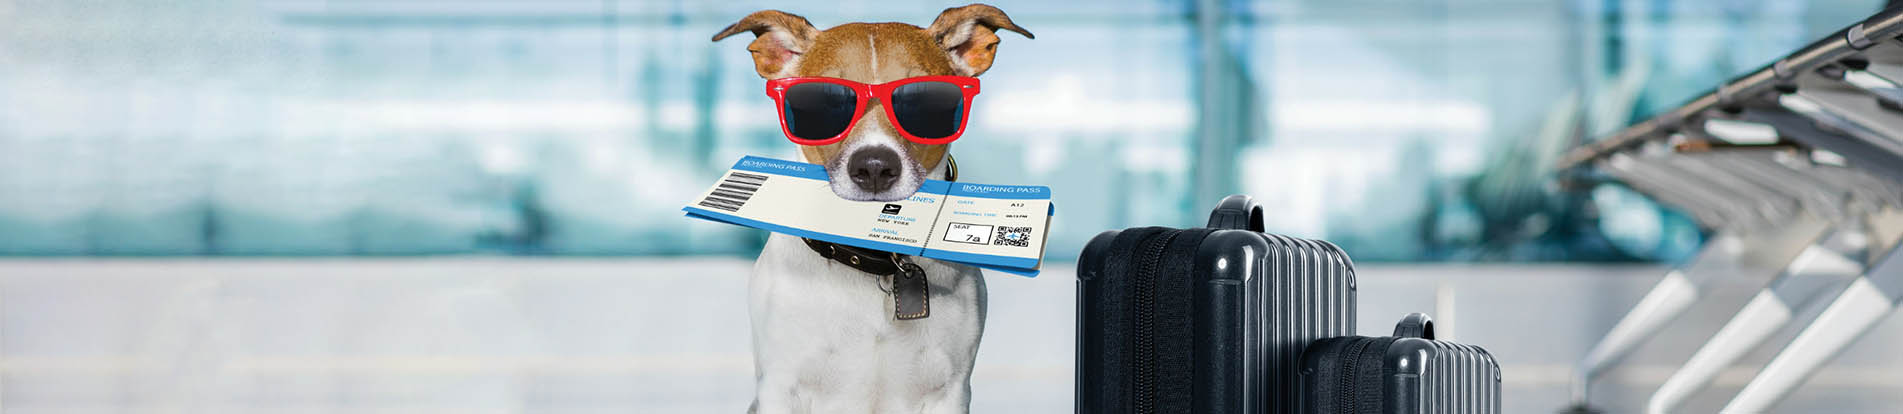 What Is The Pet Policy Of Delta Airlines?